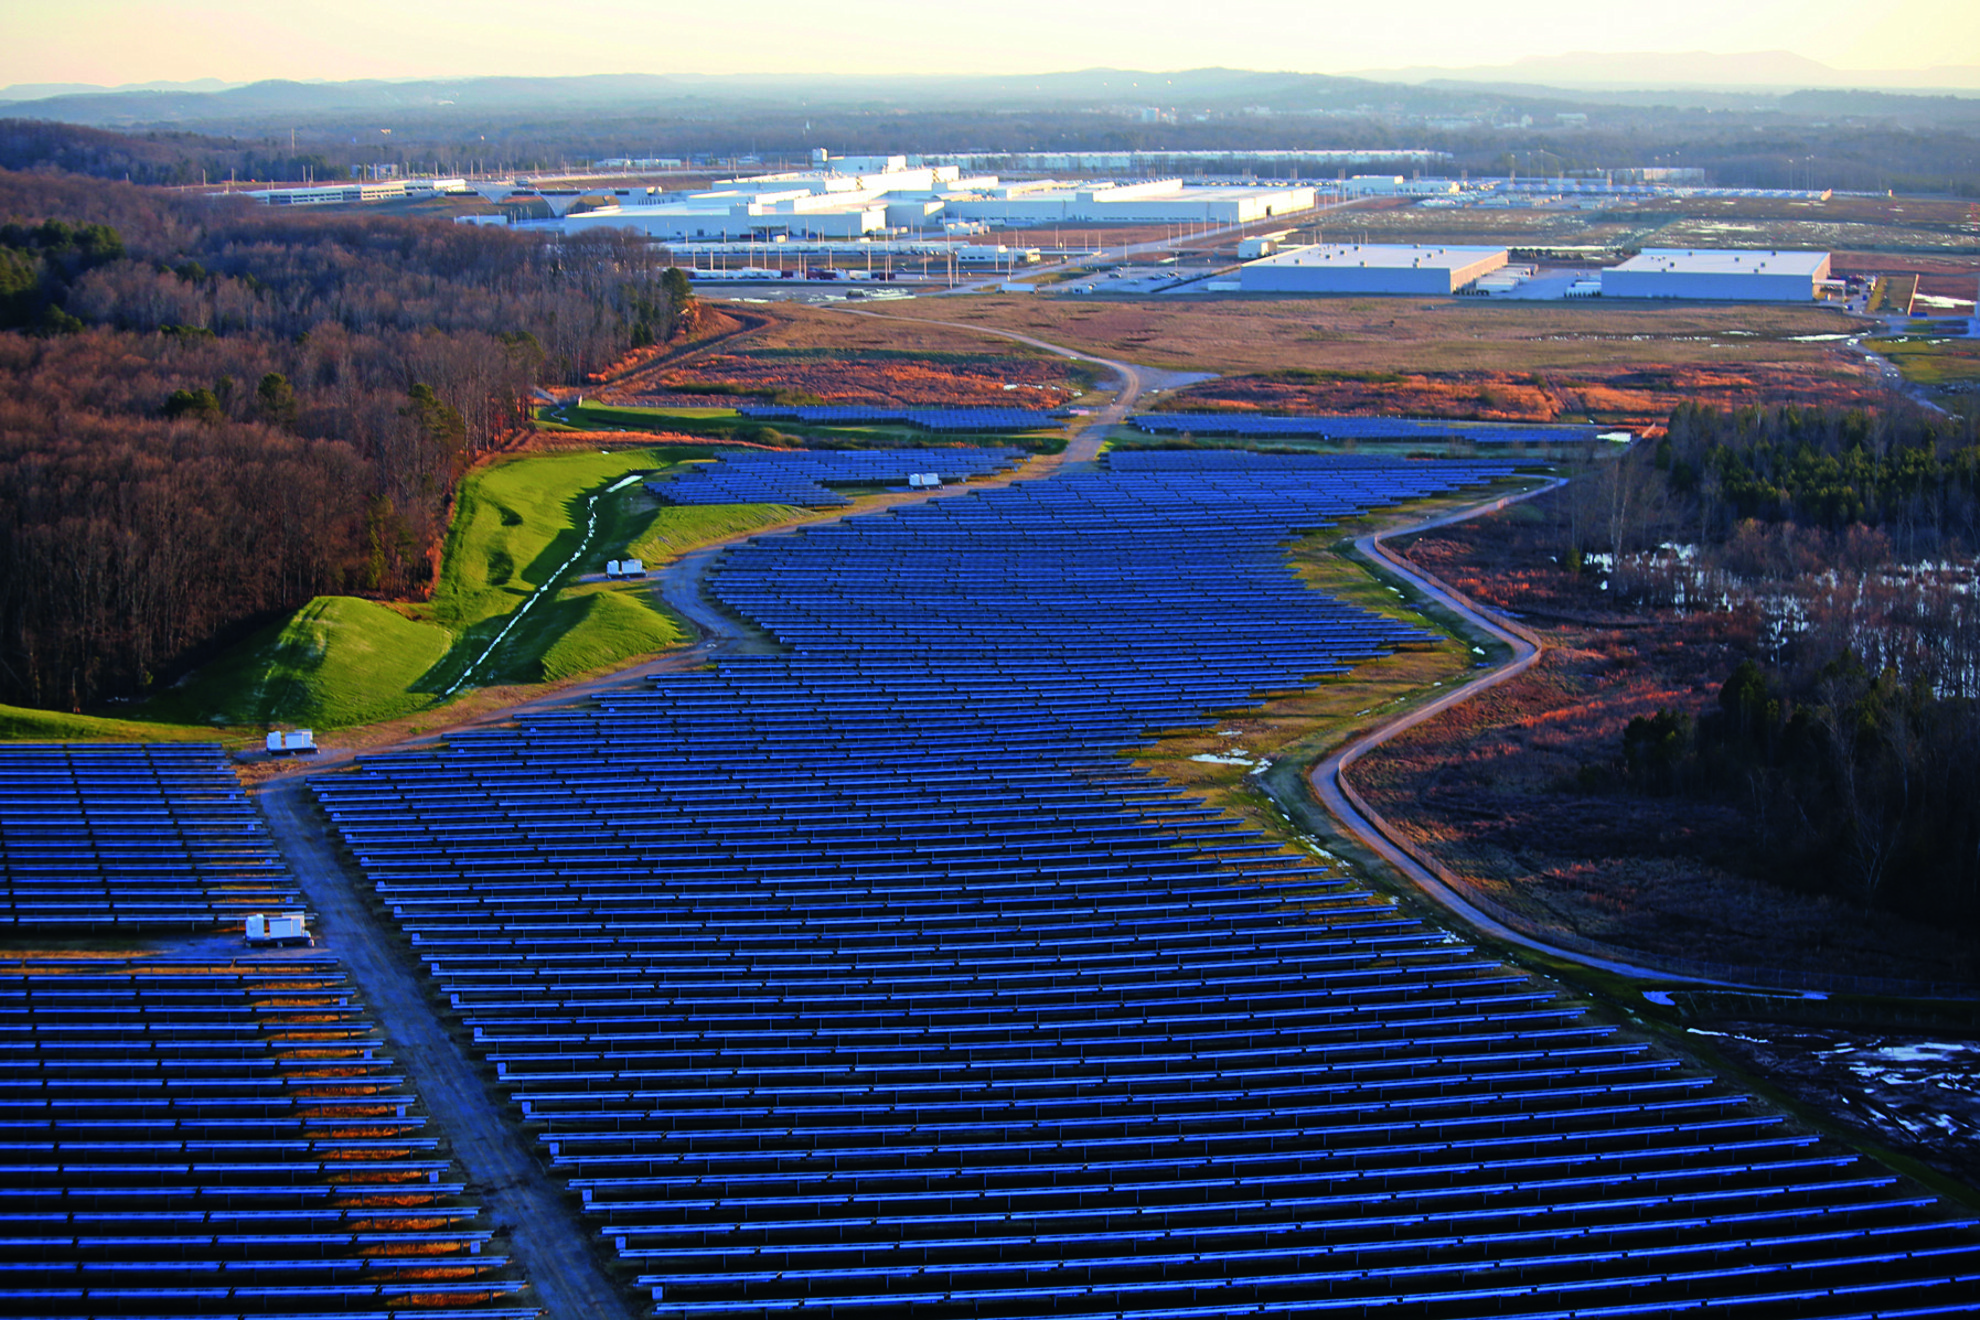 Largest solar Plant in the world by the Volkswagen brand